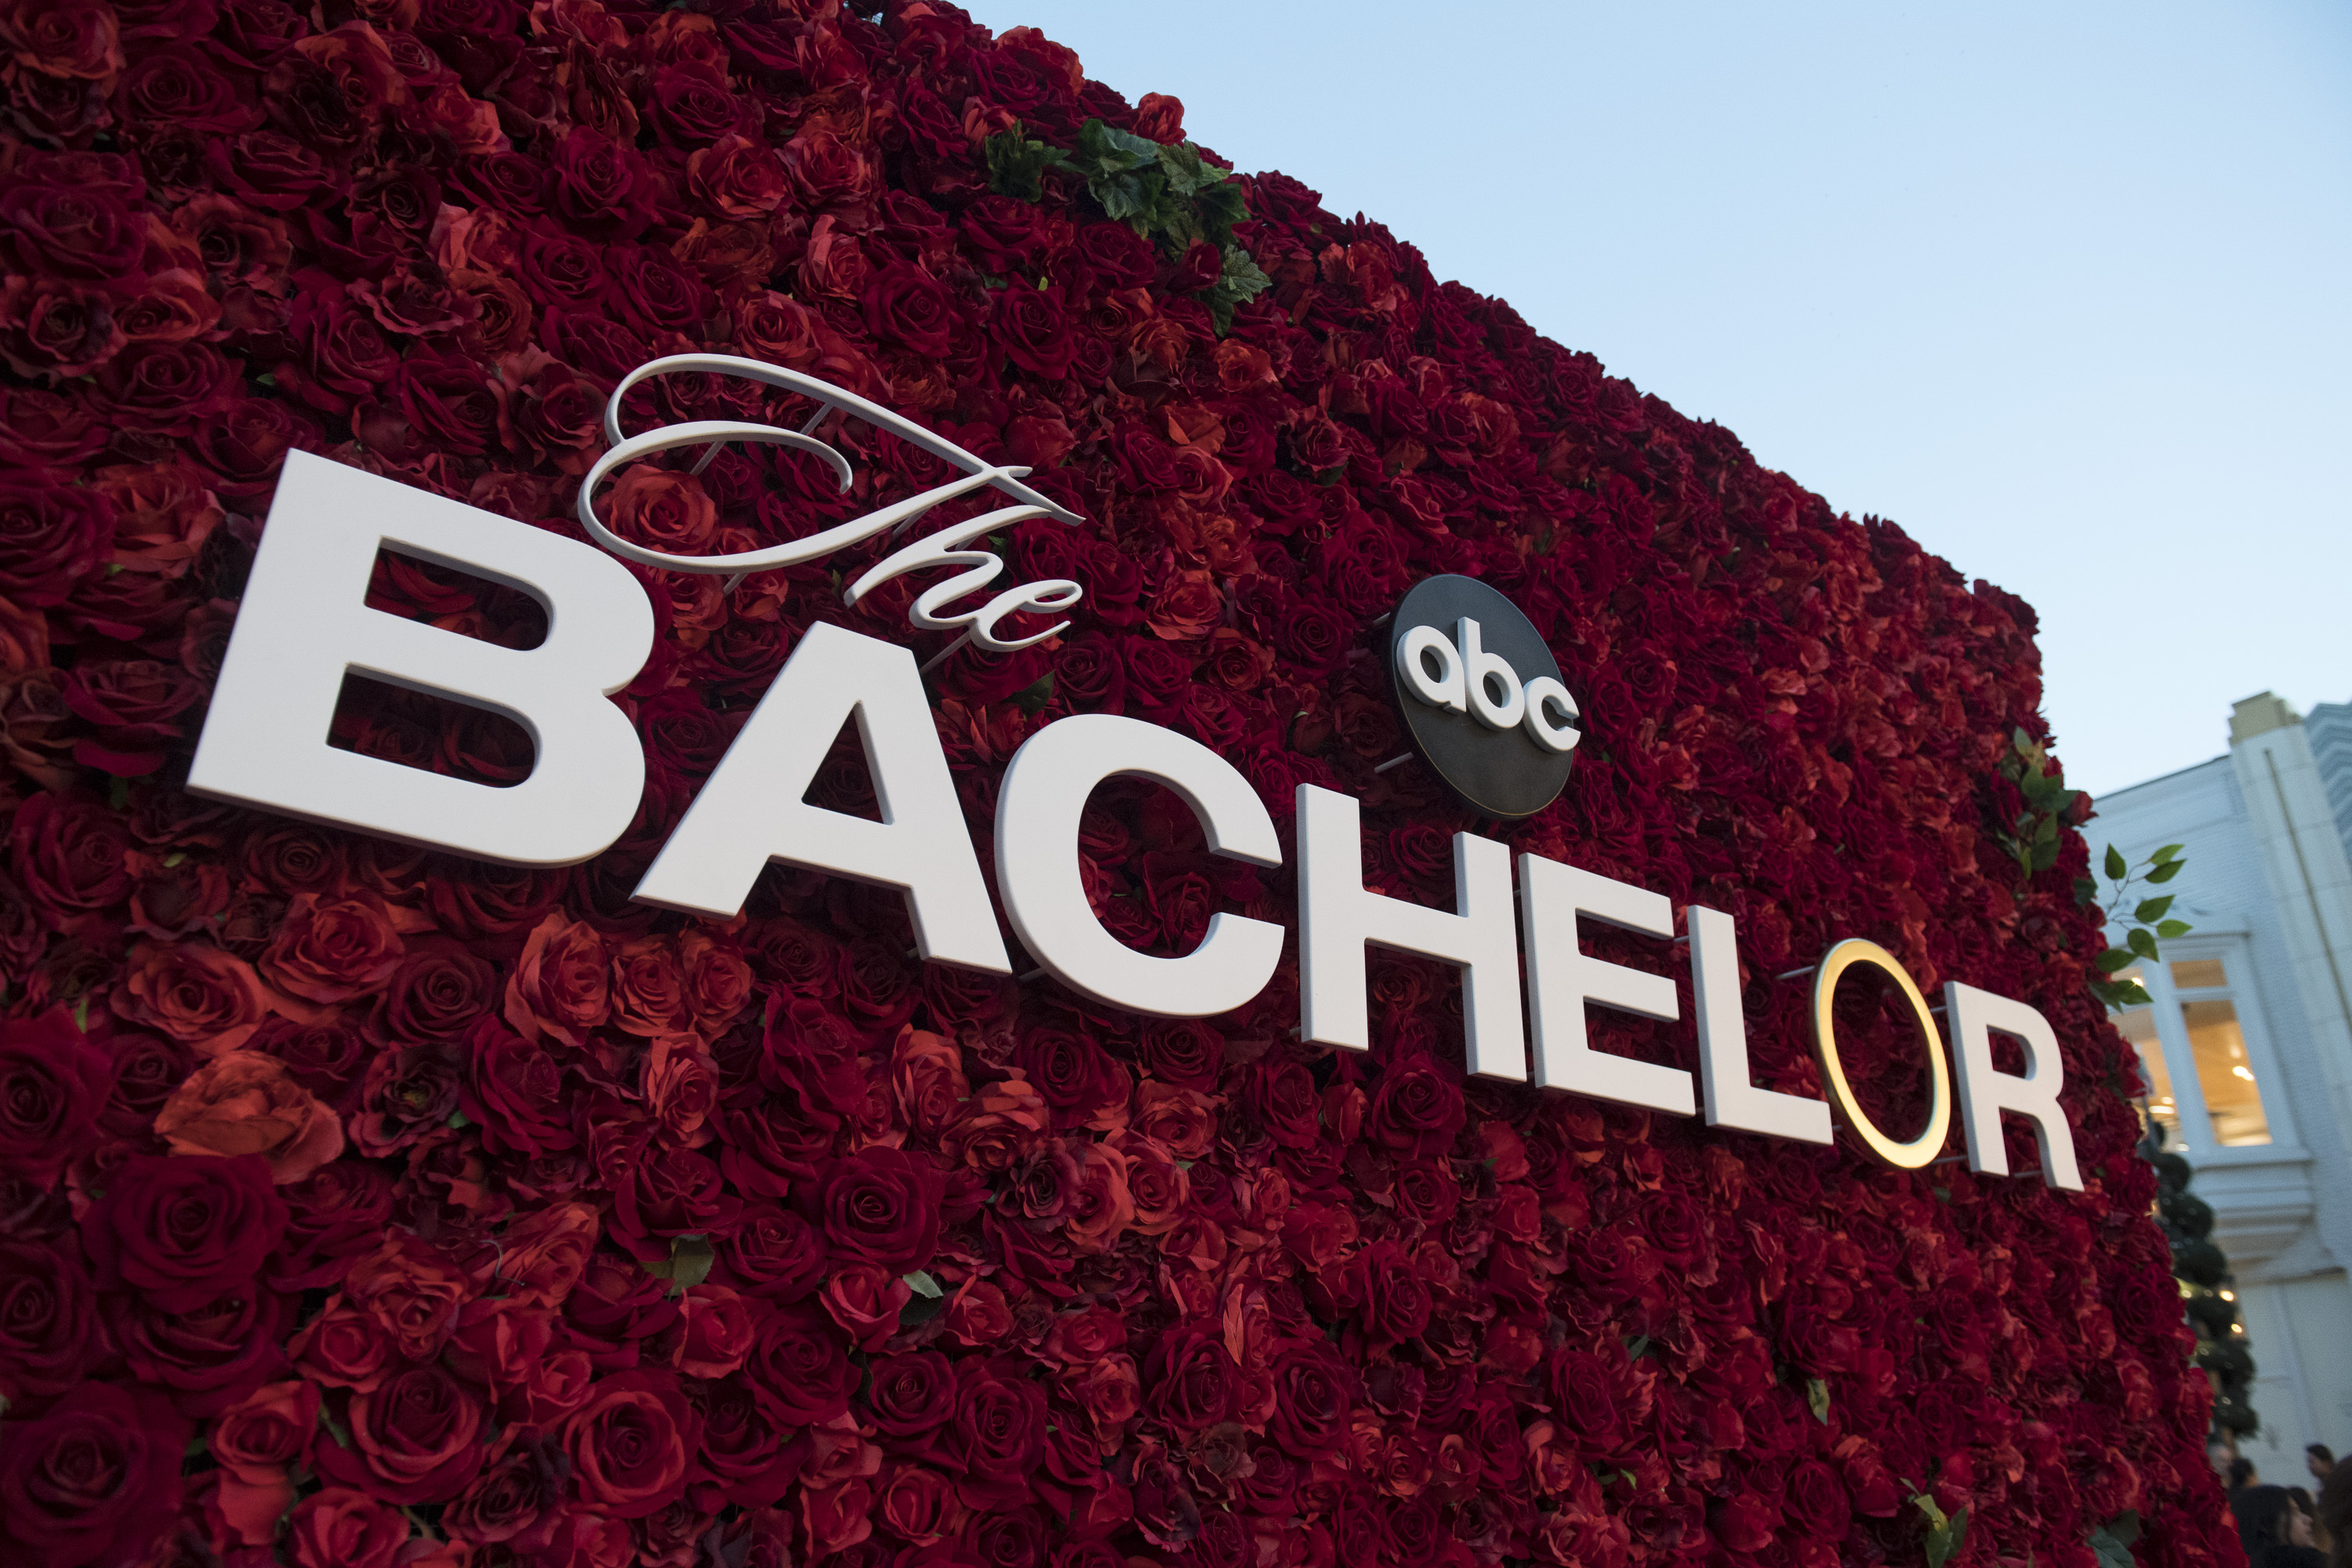 'The Bachelor' logo embedded in a wall of roses; find out what the application process is like for 'The Bachelor' and other reality TV shows